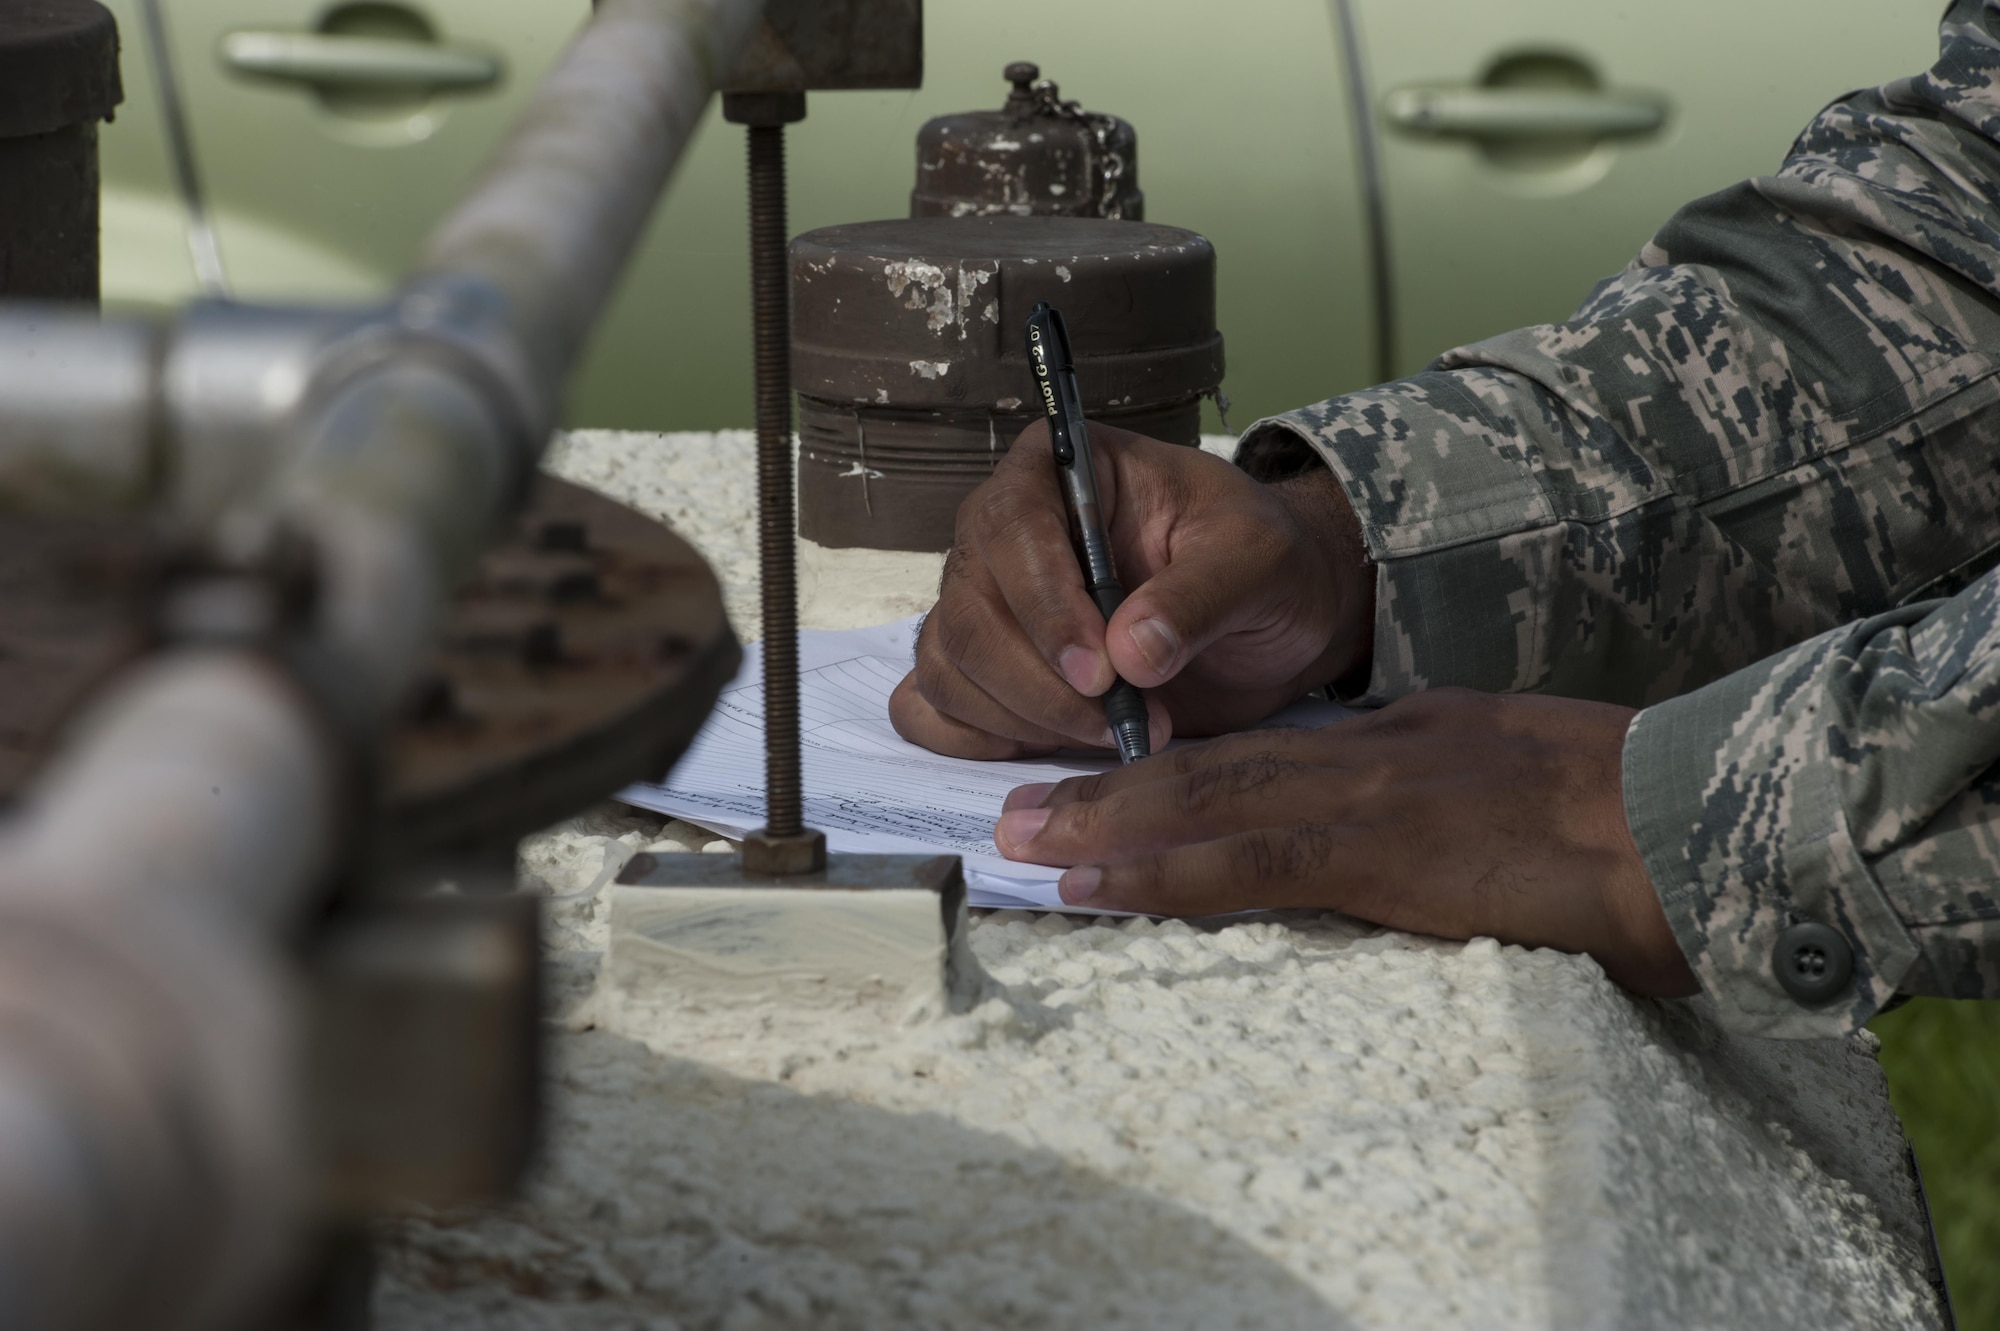 U.S. Air Force Tech. Sgt. Camarius Johnson, 18th Logistics Readiness Squadron fuels quality assurance evaluator, completes an organizational tank inspection June 21, 2016, at Kadena Air Base, Japan. Part of the inspection process involves getting paperwork signed by the evaluators. (U.S. Air Force photo by Airman 1st Class Lynette M. Rolen)